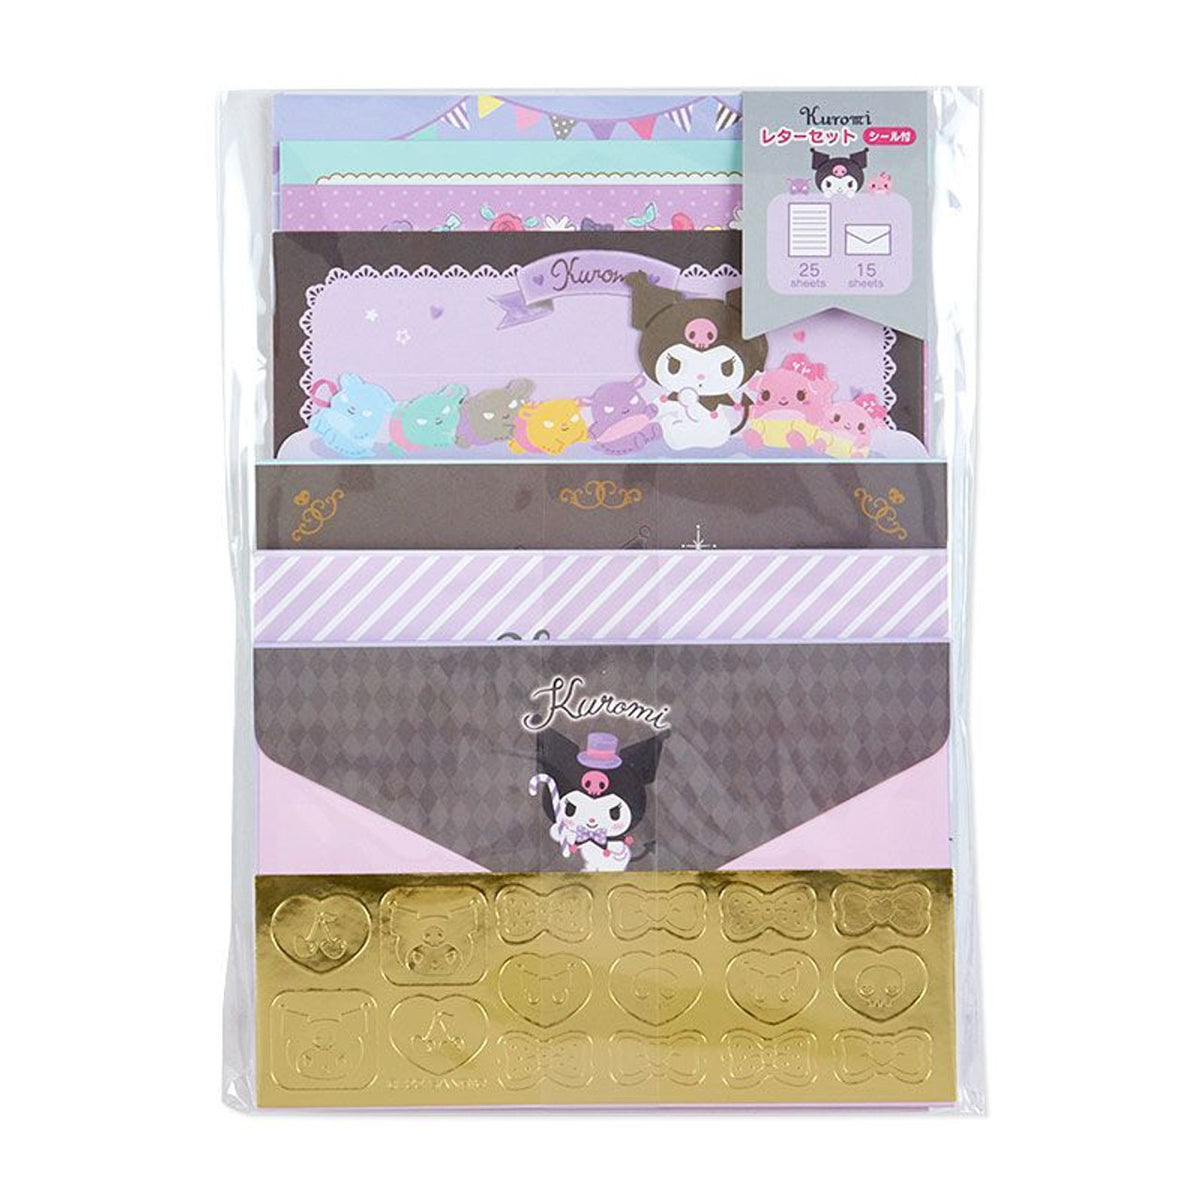 Deluxe Sanrio Mystery Box, Kuromi Stationery Set, My Melody Gift Box,  Pompompurin Cute Items, Pochacco Gift Set, Cinnamoroll Gift for Her 